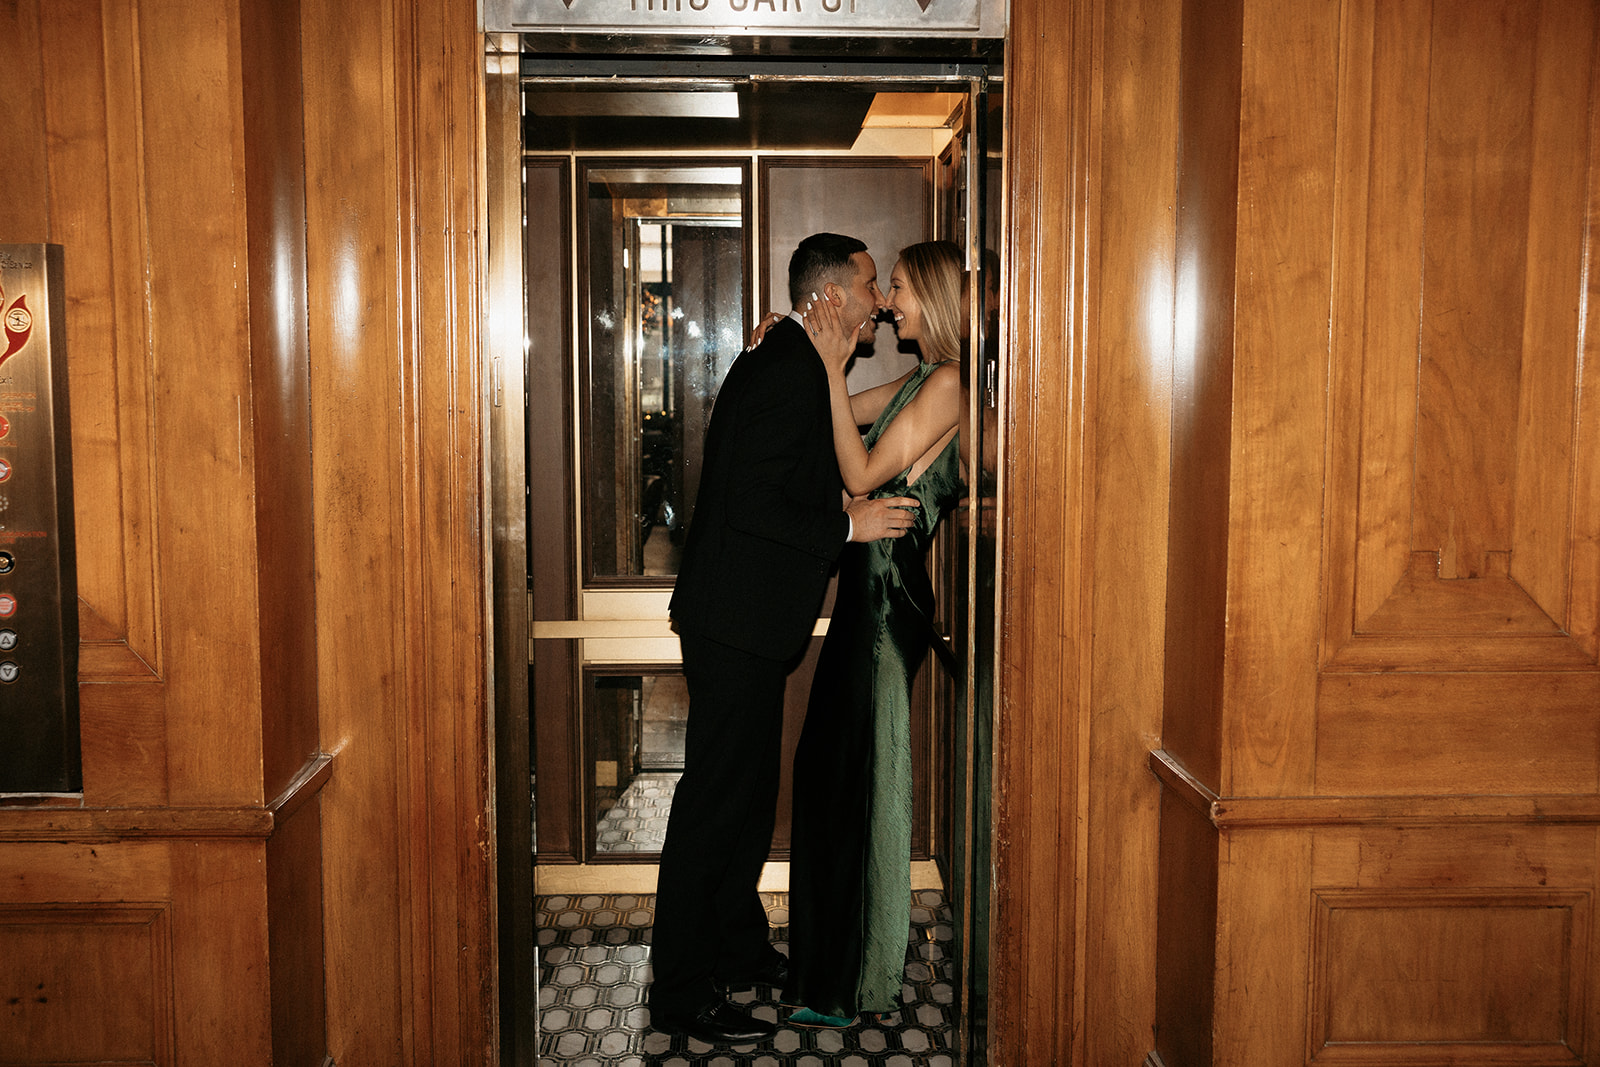 The couple sneaks a kiss in an elevator at the Hotel Fort Des Moines.